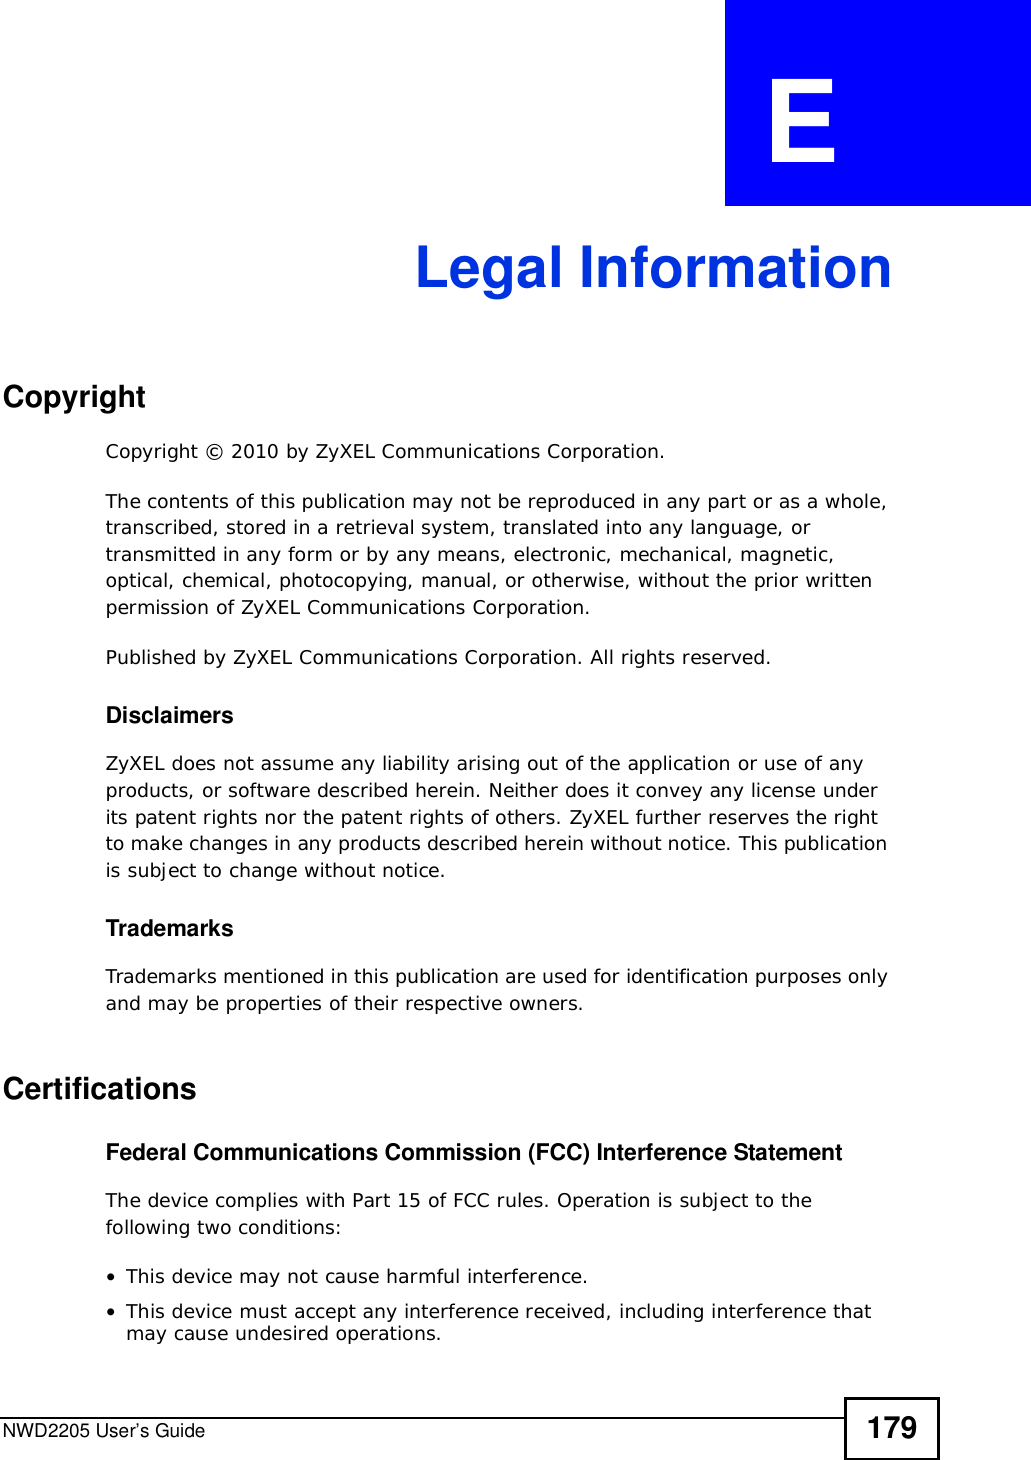 NWD2205 User’s Guide 179APPENDIX  E Legal InformationCopyrightCopyright © 2010 by ZyXEL Communications Corporation.The contents of this publication may not be reproduced in any part or as a whole, transcribed, stored in a retrieval system, translated into any language, or transmitted in any form or by any means, electronic, mechanical, magnetic, optical, chemical, photocopying, manual, or otherwise, without the prior written permission of ZyXEL Communications Corporation.Published by ZyXEL Communications Corporation. All rights reserved.DisclaimersZyXEL does not assume any liability arising out of the application or use of any products, or software described herein. Neither does it convey any license under its patent rights nor the patent rights of others. ZyXEL further reserves the right to make changes in any products described herein without notice. This publication is subject to change without notice.TrademarksTrademarks mentioned in this publication are used for identification purposes only and may be properties of their respective owners.CertificationsFederal Communications Commission (FCC) Interference StatementThe device complies with Part 15 of FCC rules. Operation is subject to the following two conditions:•This device may not cause harmful interference.•This device must accept any interference received, including interference that may cause undesired operations.